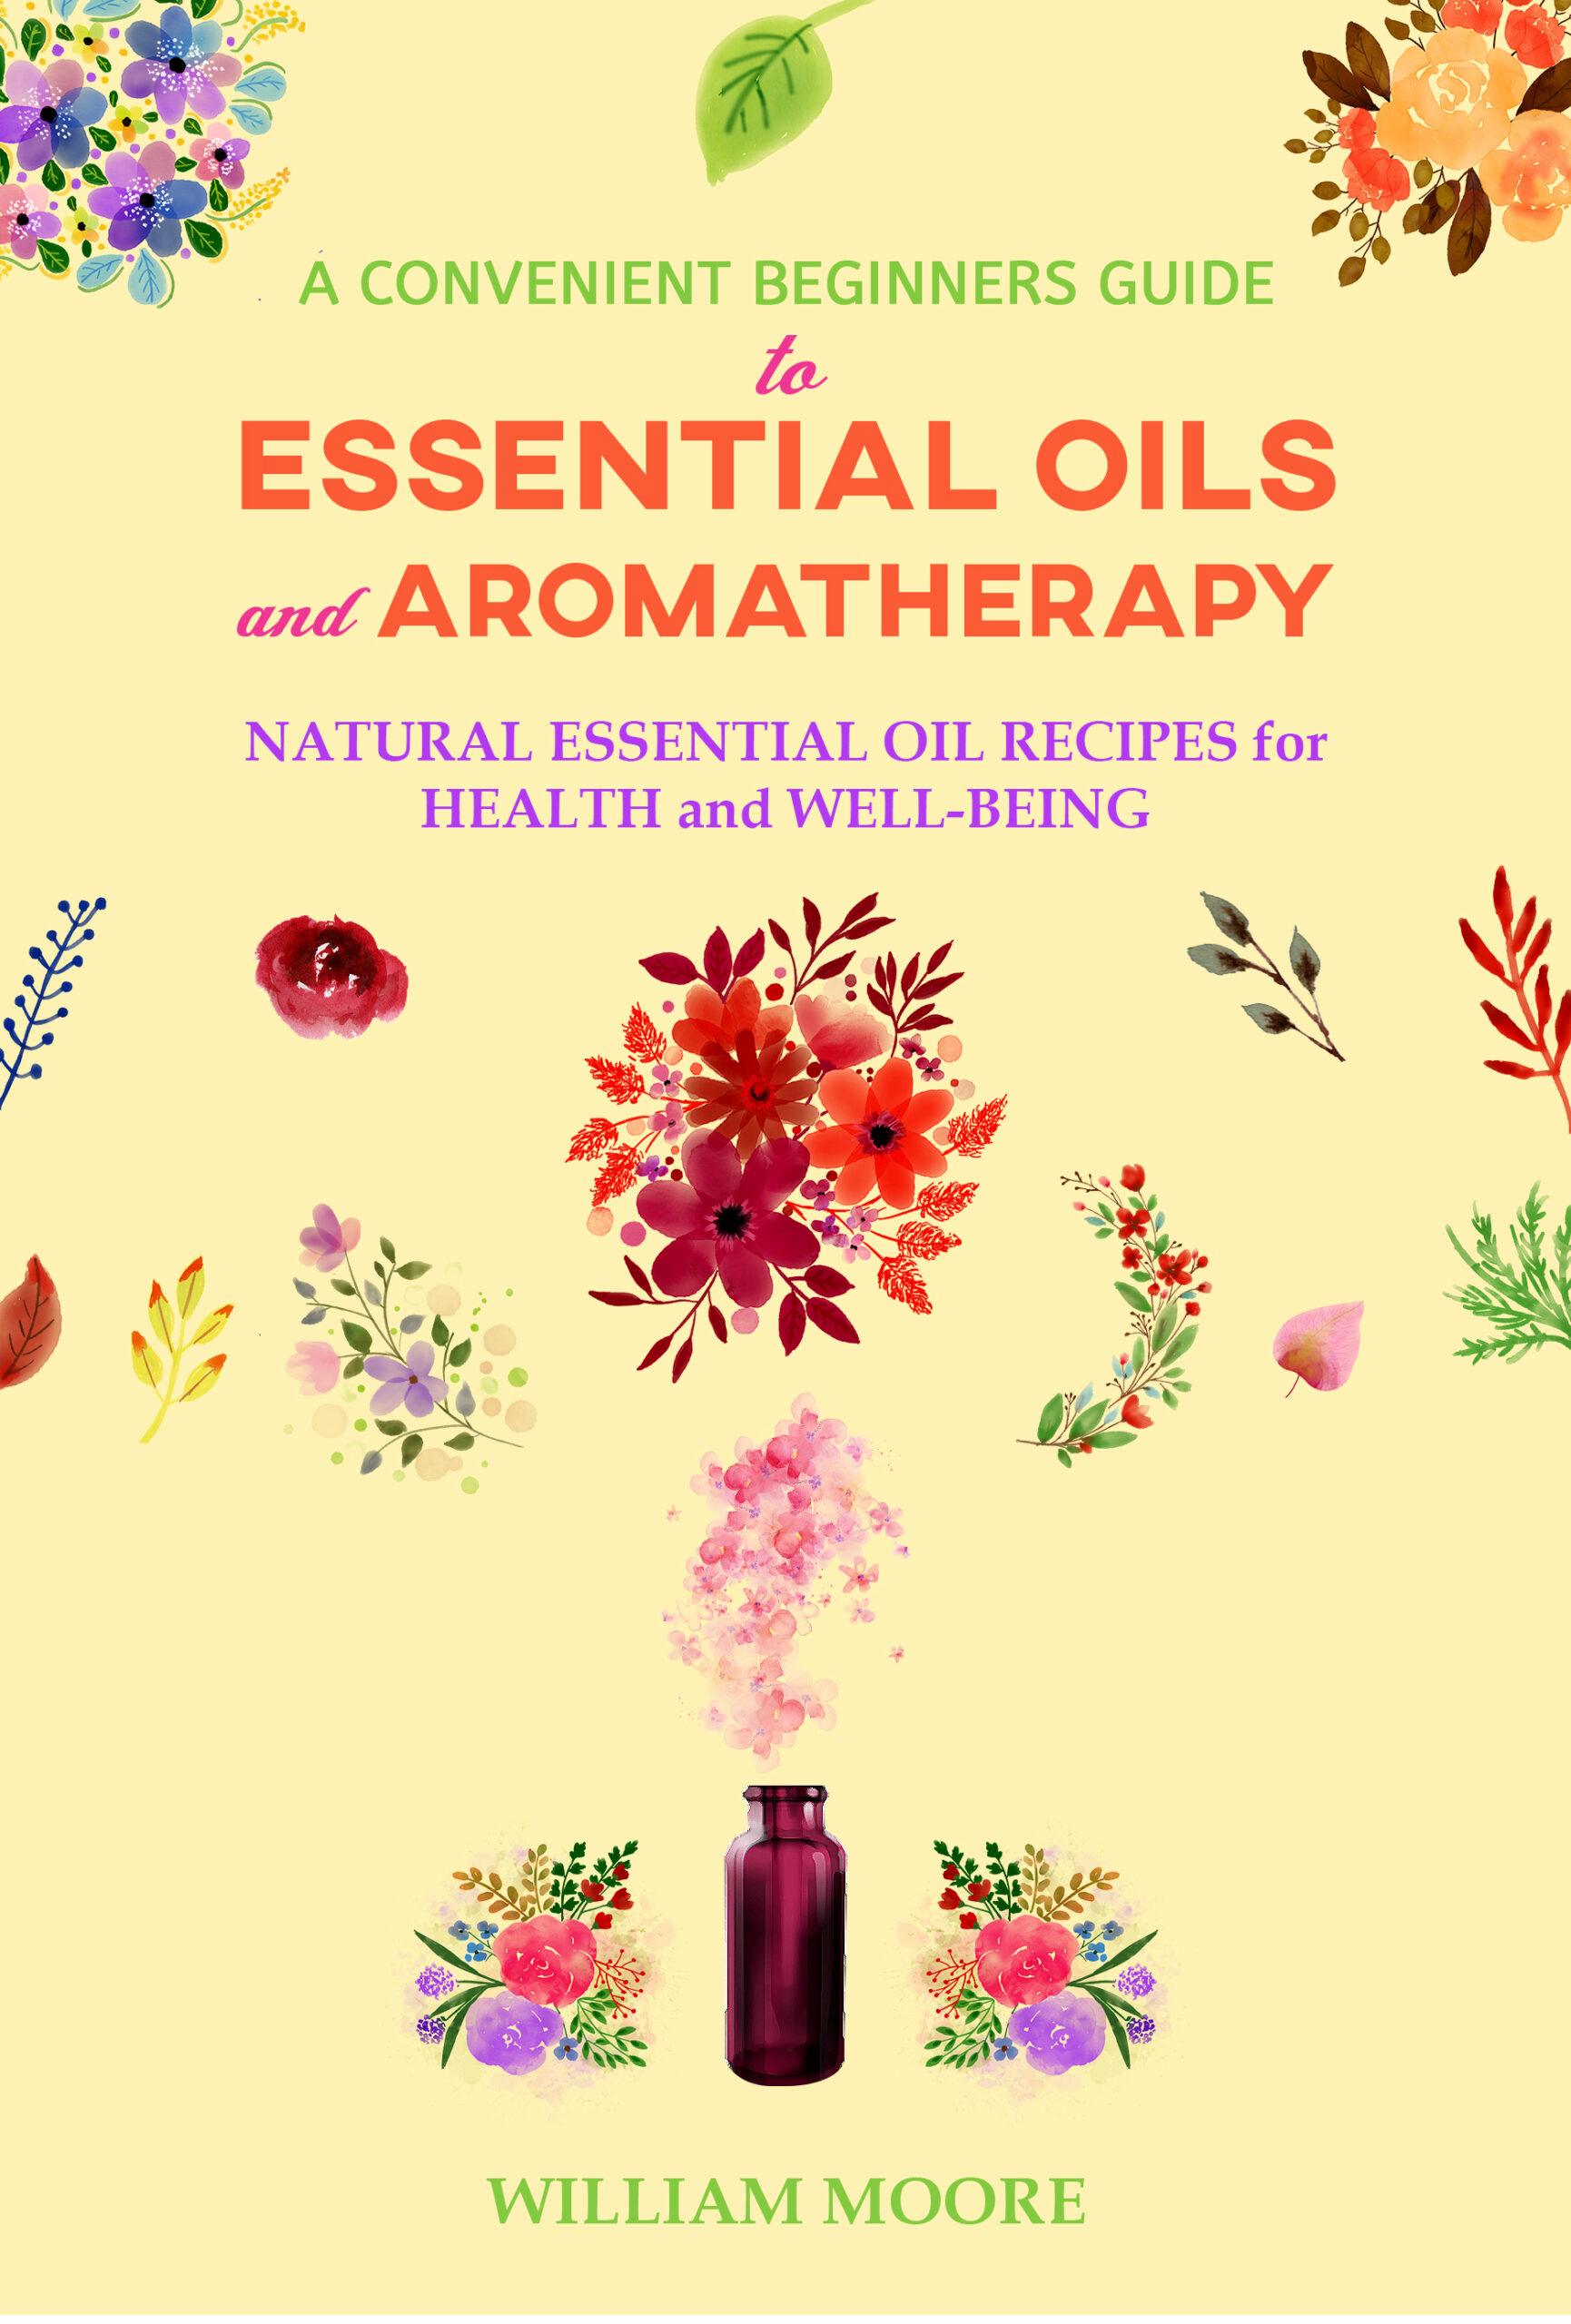 FREE: A Convenient Beginners Guide to Essential Oils and Aromatherapy by William Moore